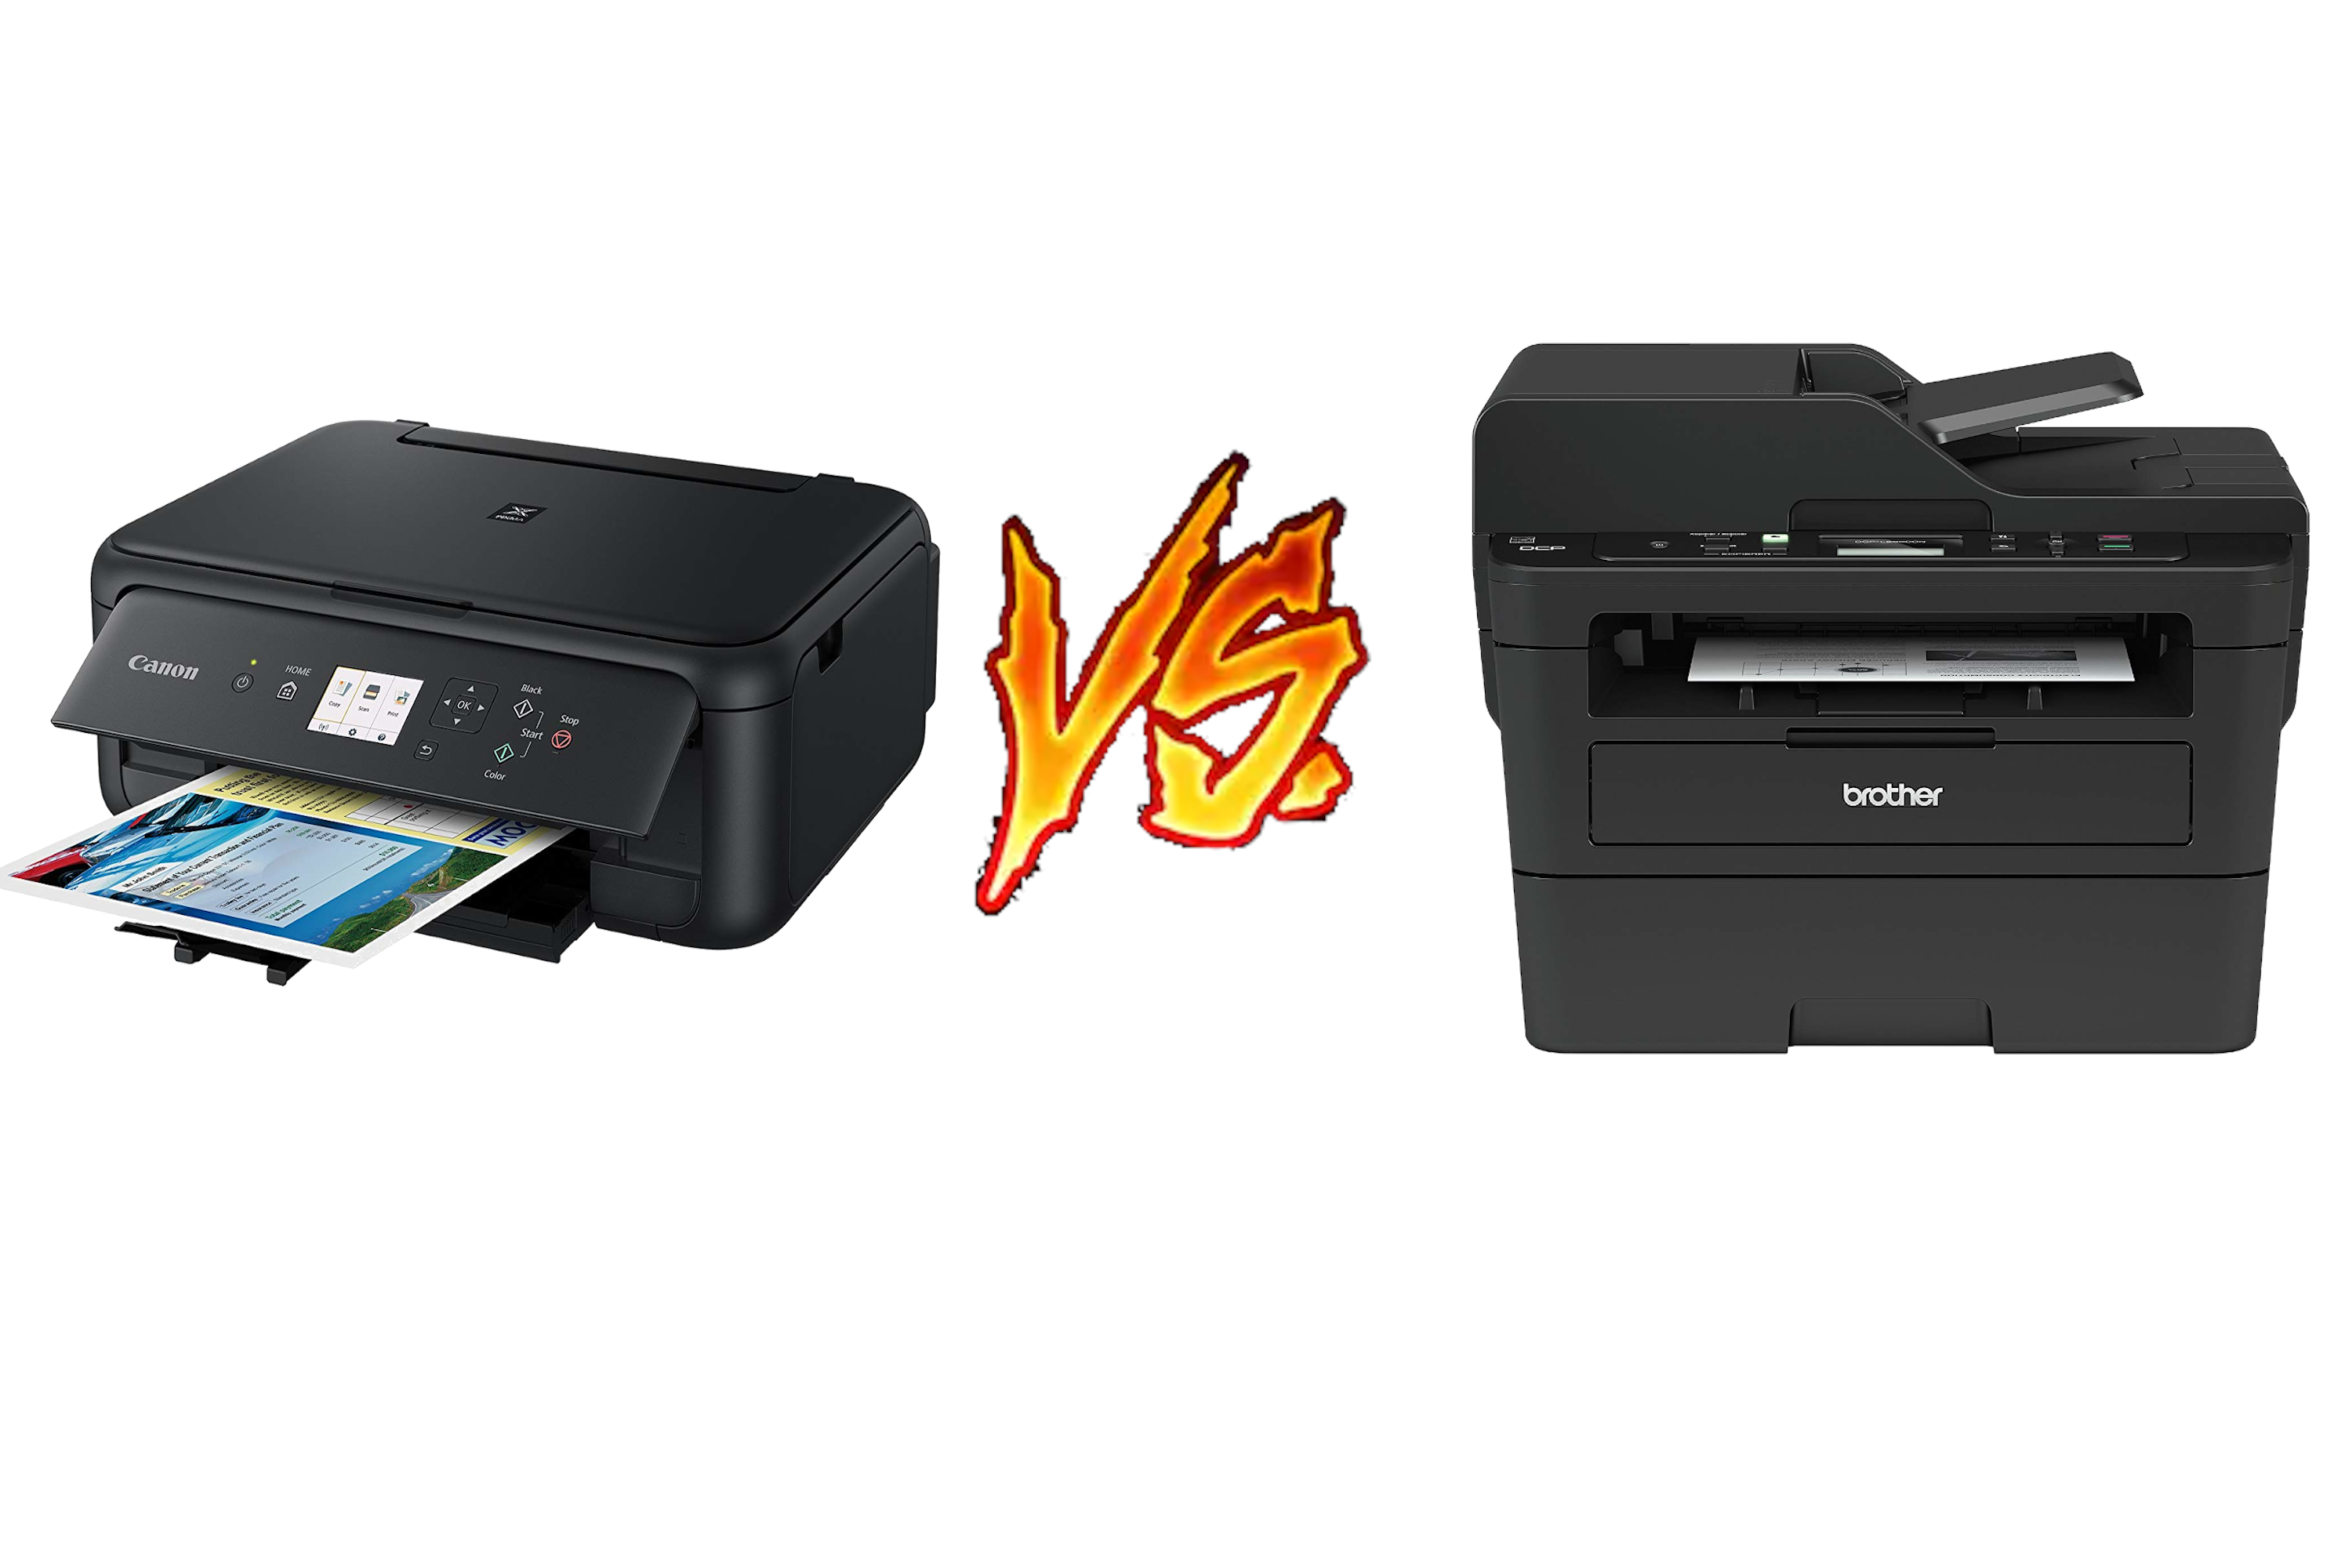 timer Om toevlucht te zoeken stikstof Home office guide: Inkjet vs Laser - which printer do you need? -  NotebookCheck.net News